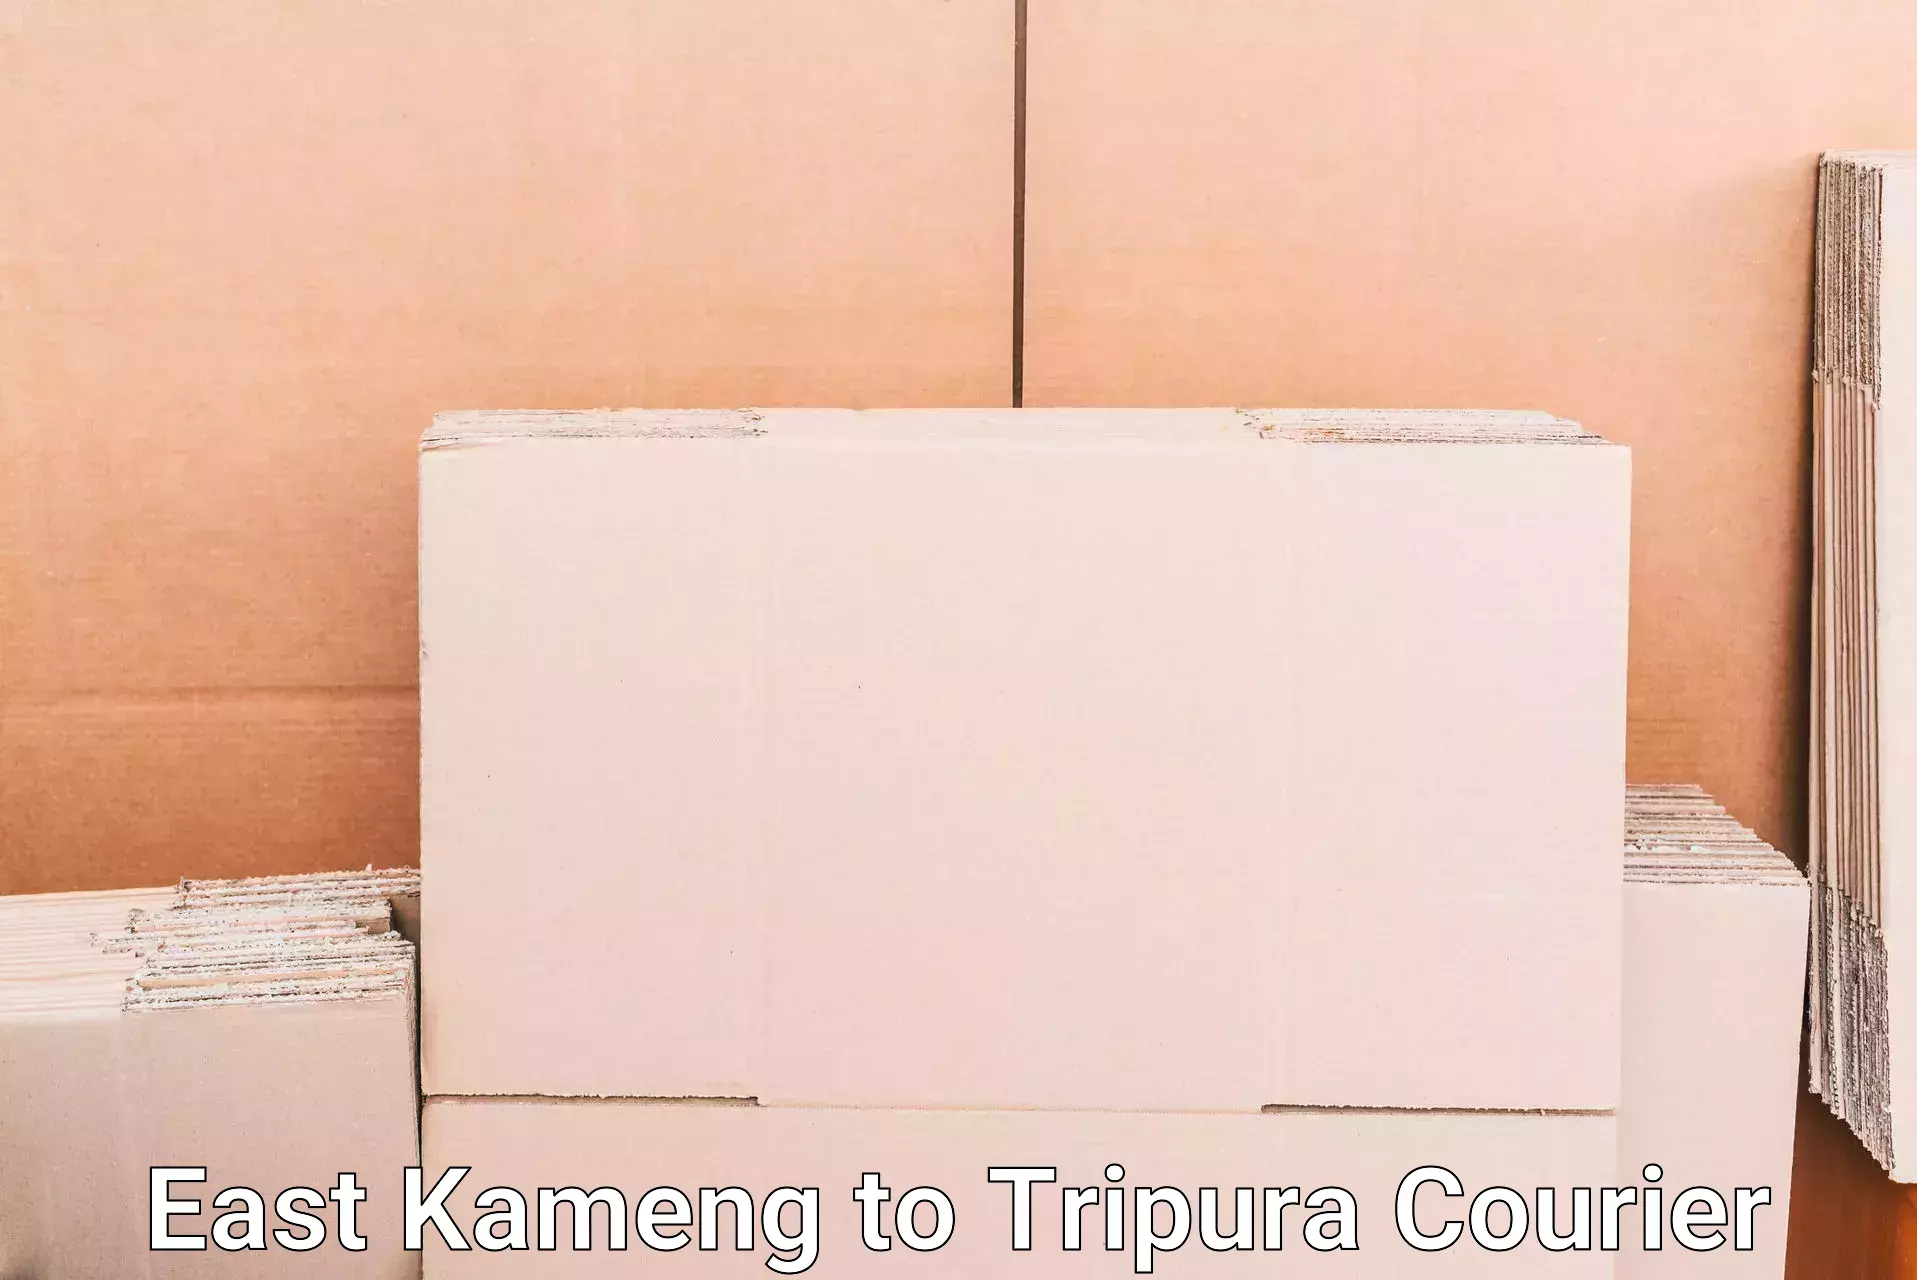 Luggage shipment processing in East Kameng to Tripura